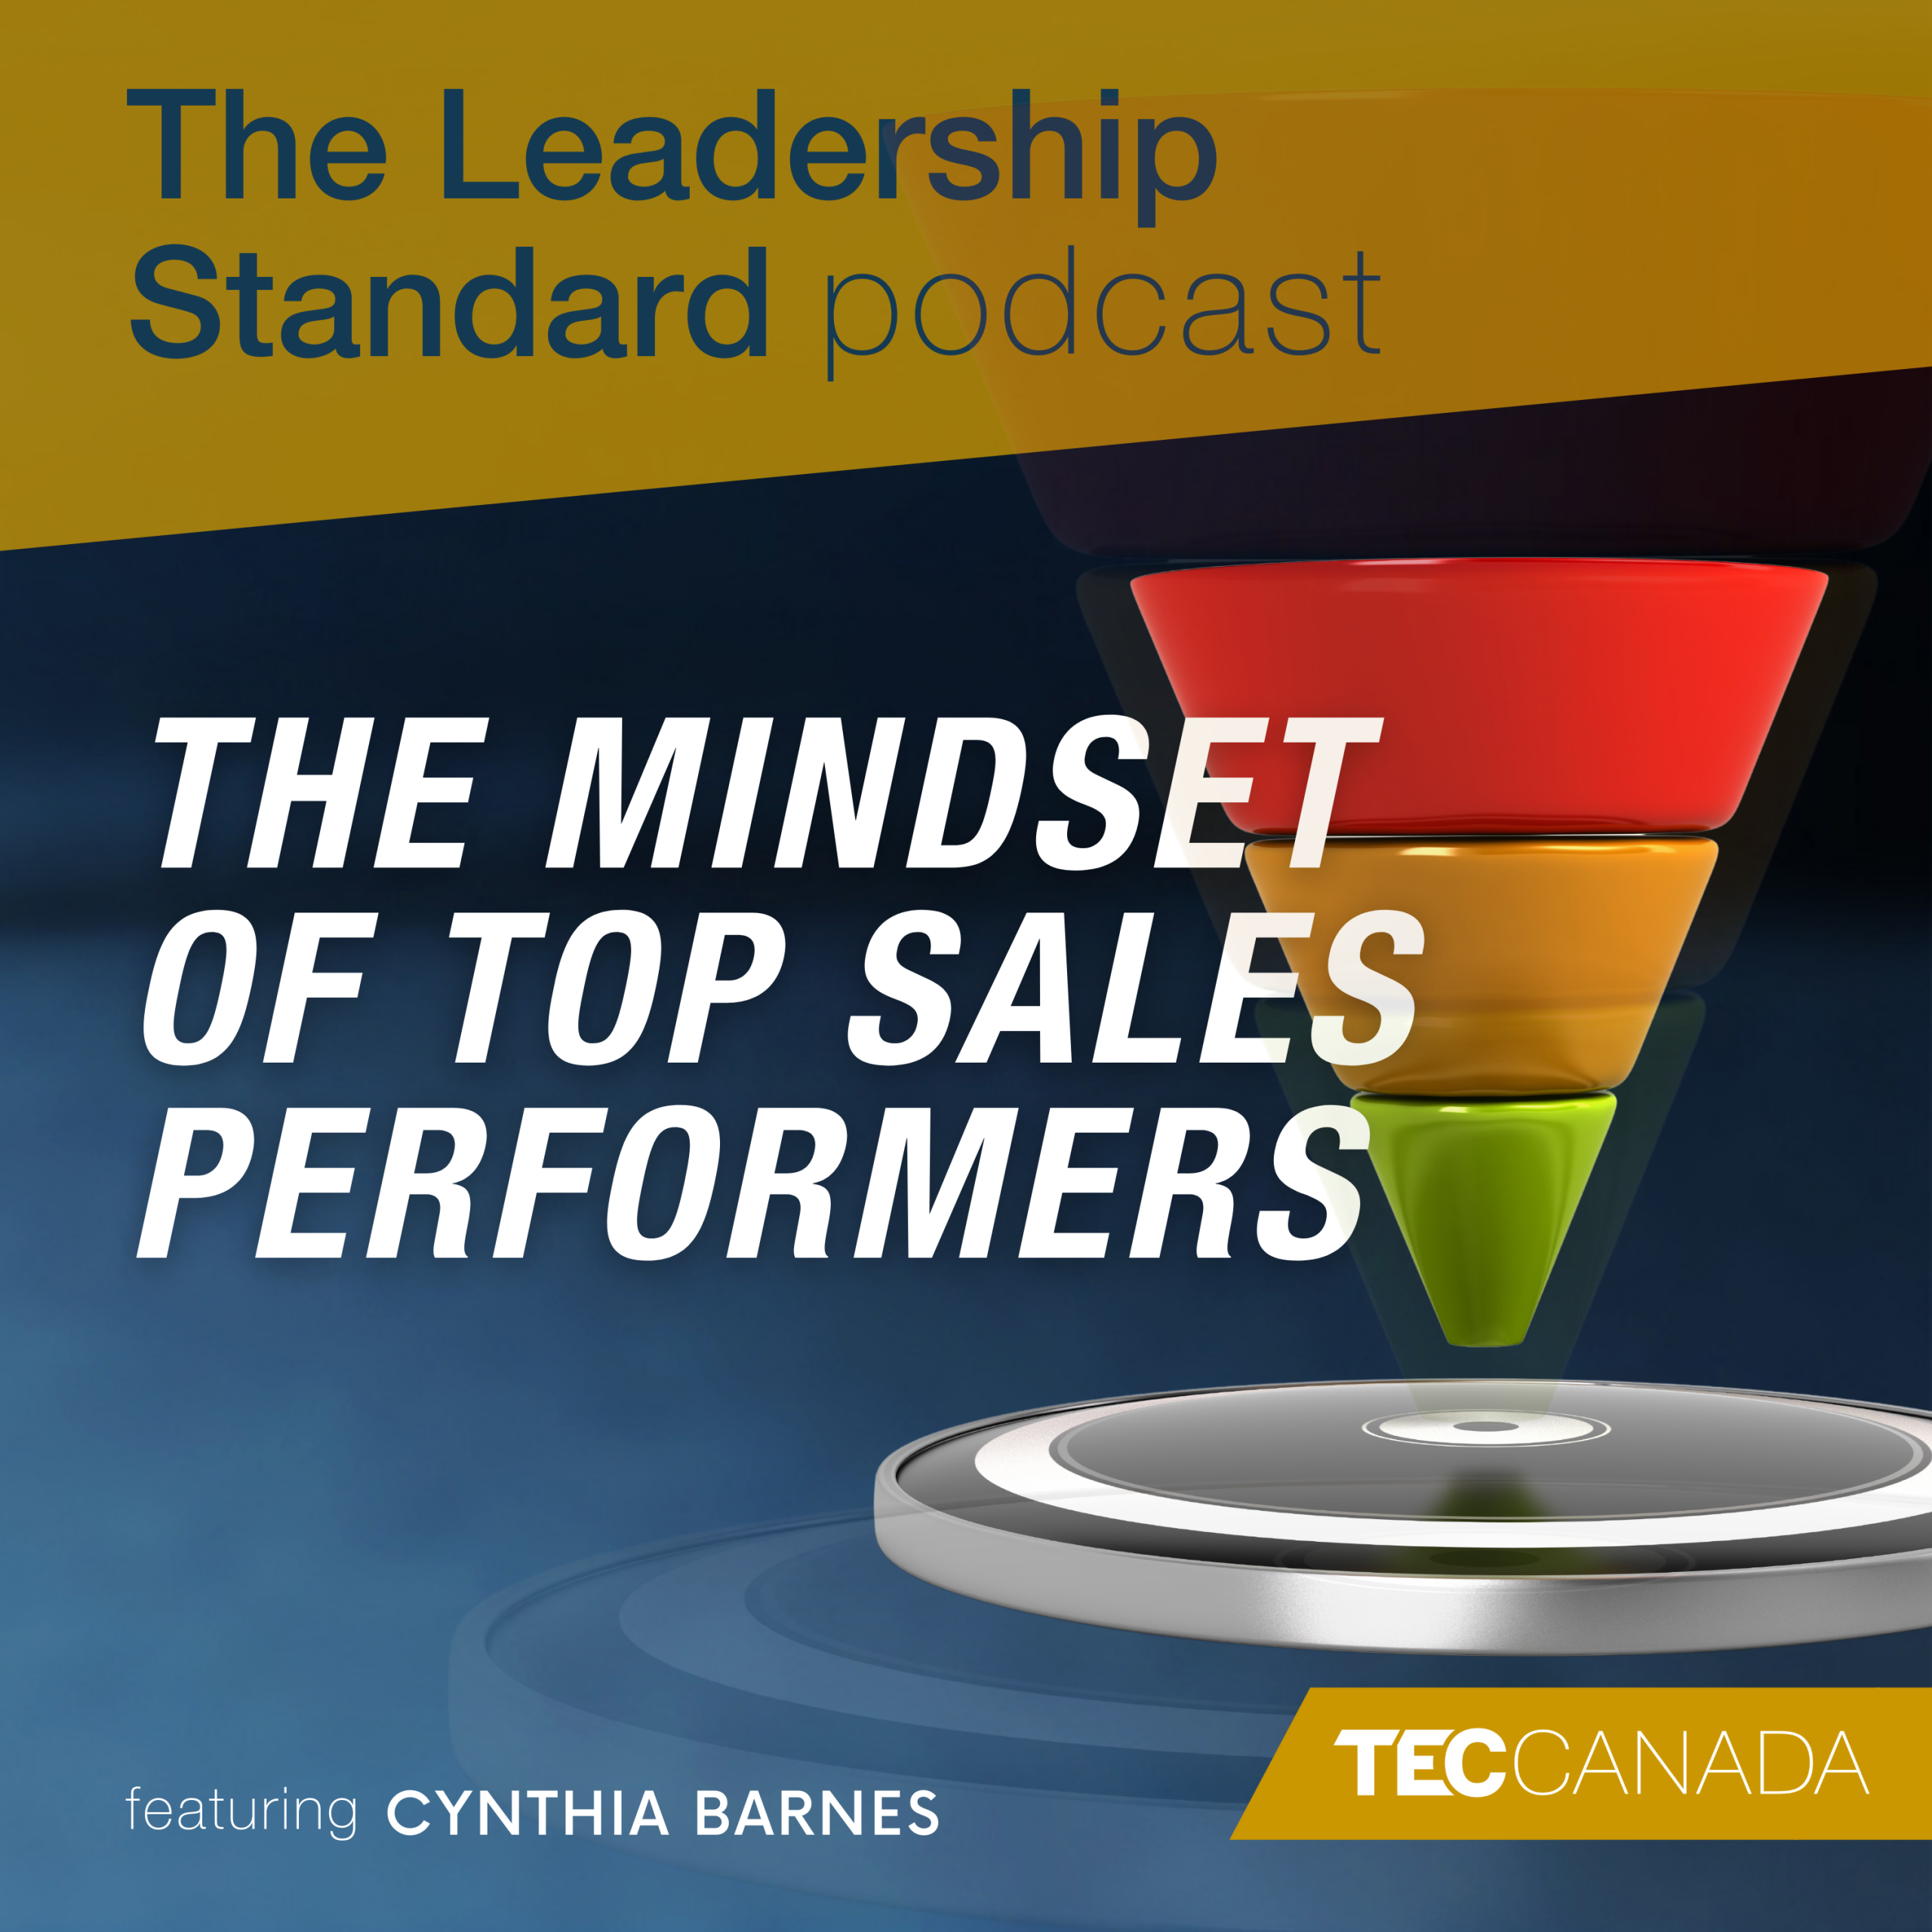 Cynthia Barnes 2nd degree connection2nd LinkedIn Top Voice | Sales Influencer | Keynote Speaker | Storyteller | Encourager | Champion for Women in Sales